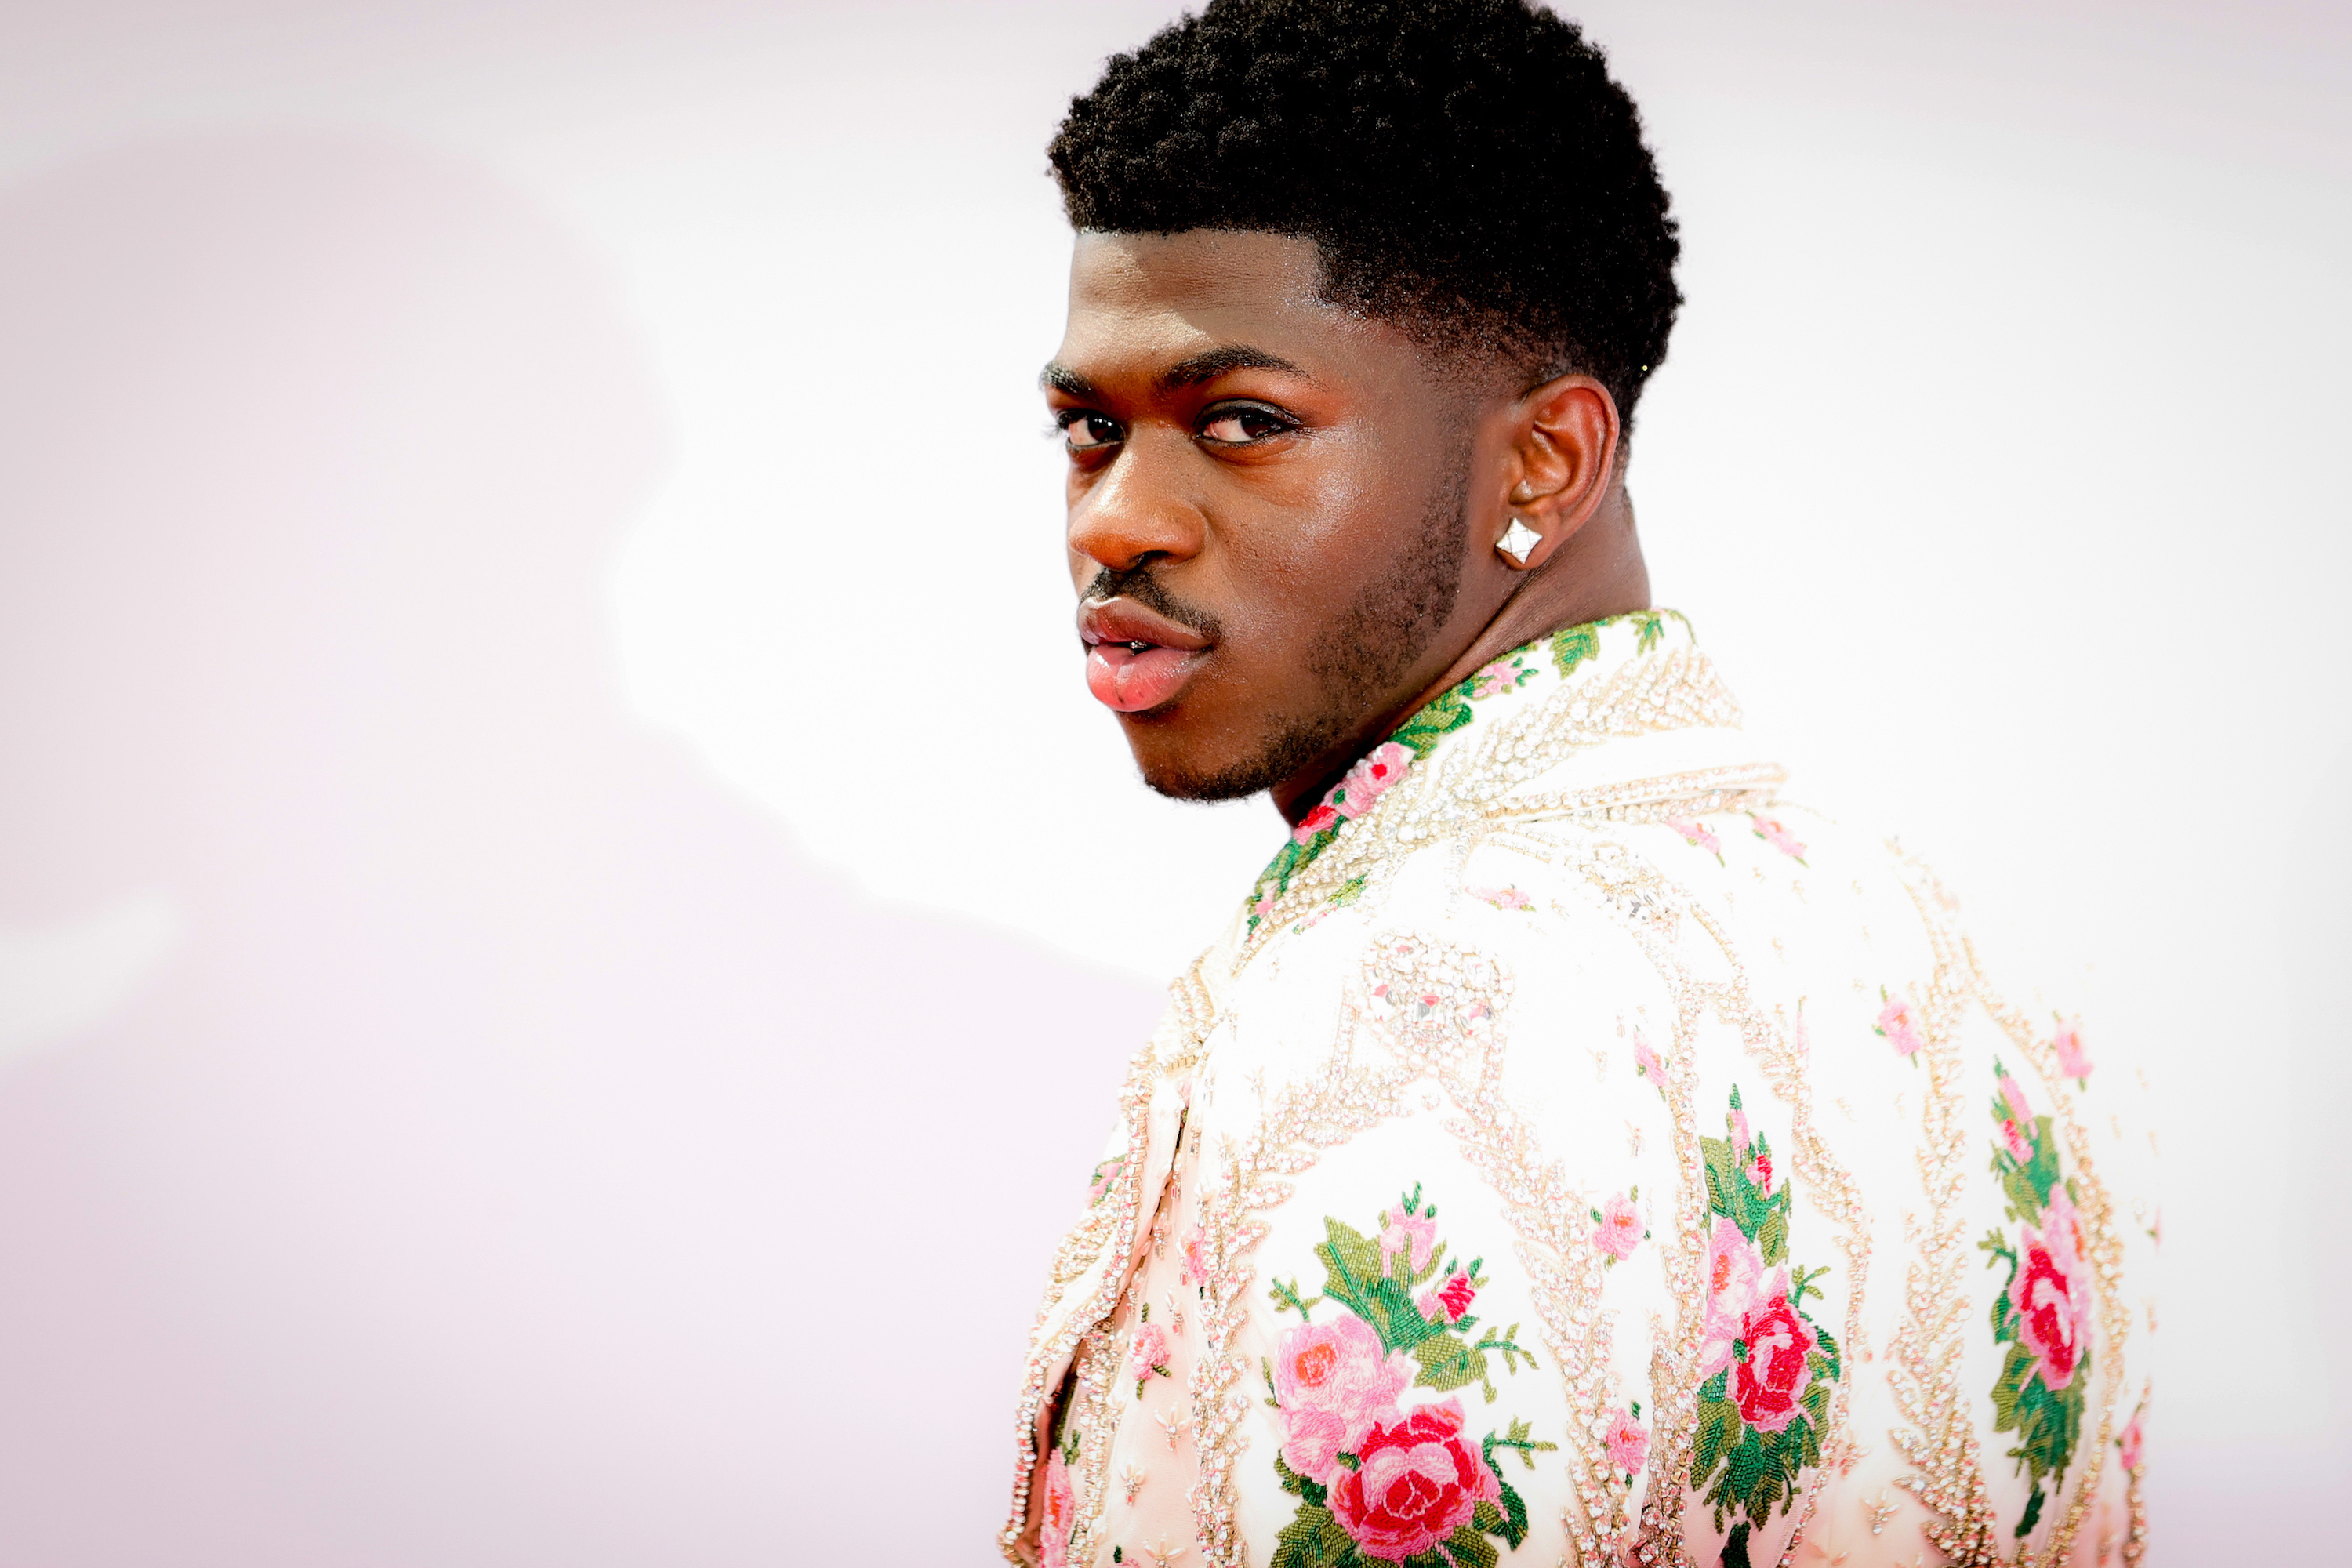 Lil Nas X attends the BET Awards 2021 at Microsoft Theater